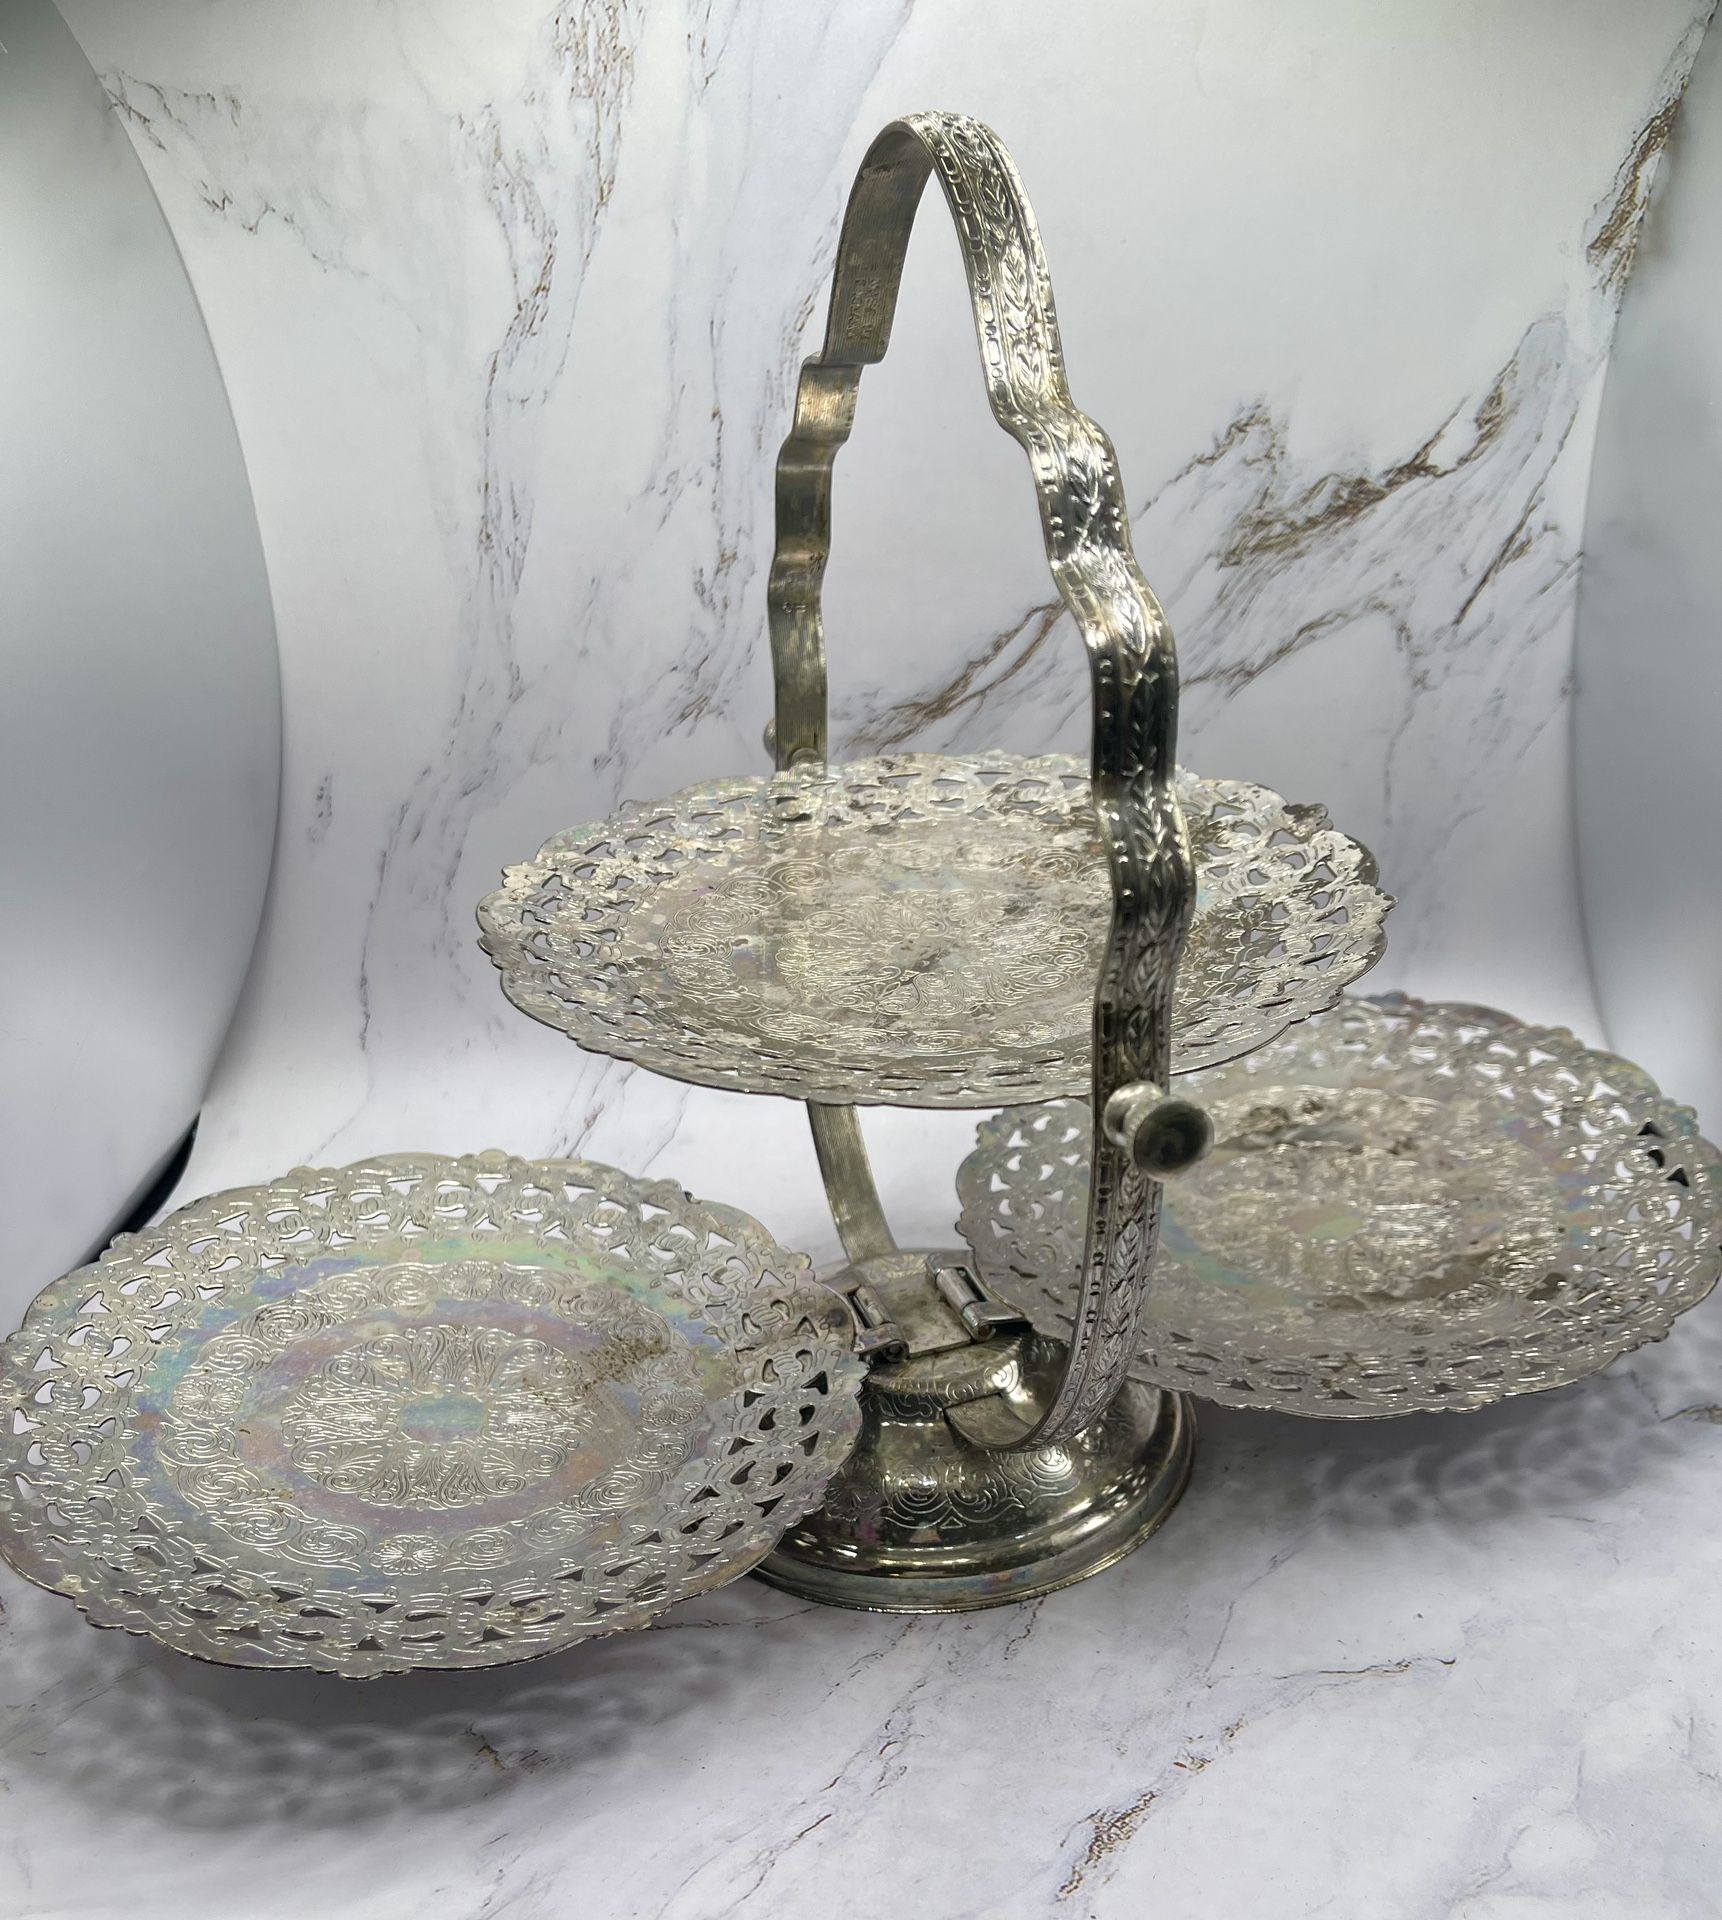 Vintage 3 Tier Foldable Clam Shell Silver-Plate Cake Stand Serving Tray Handle